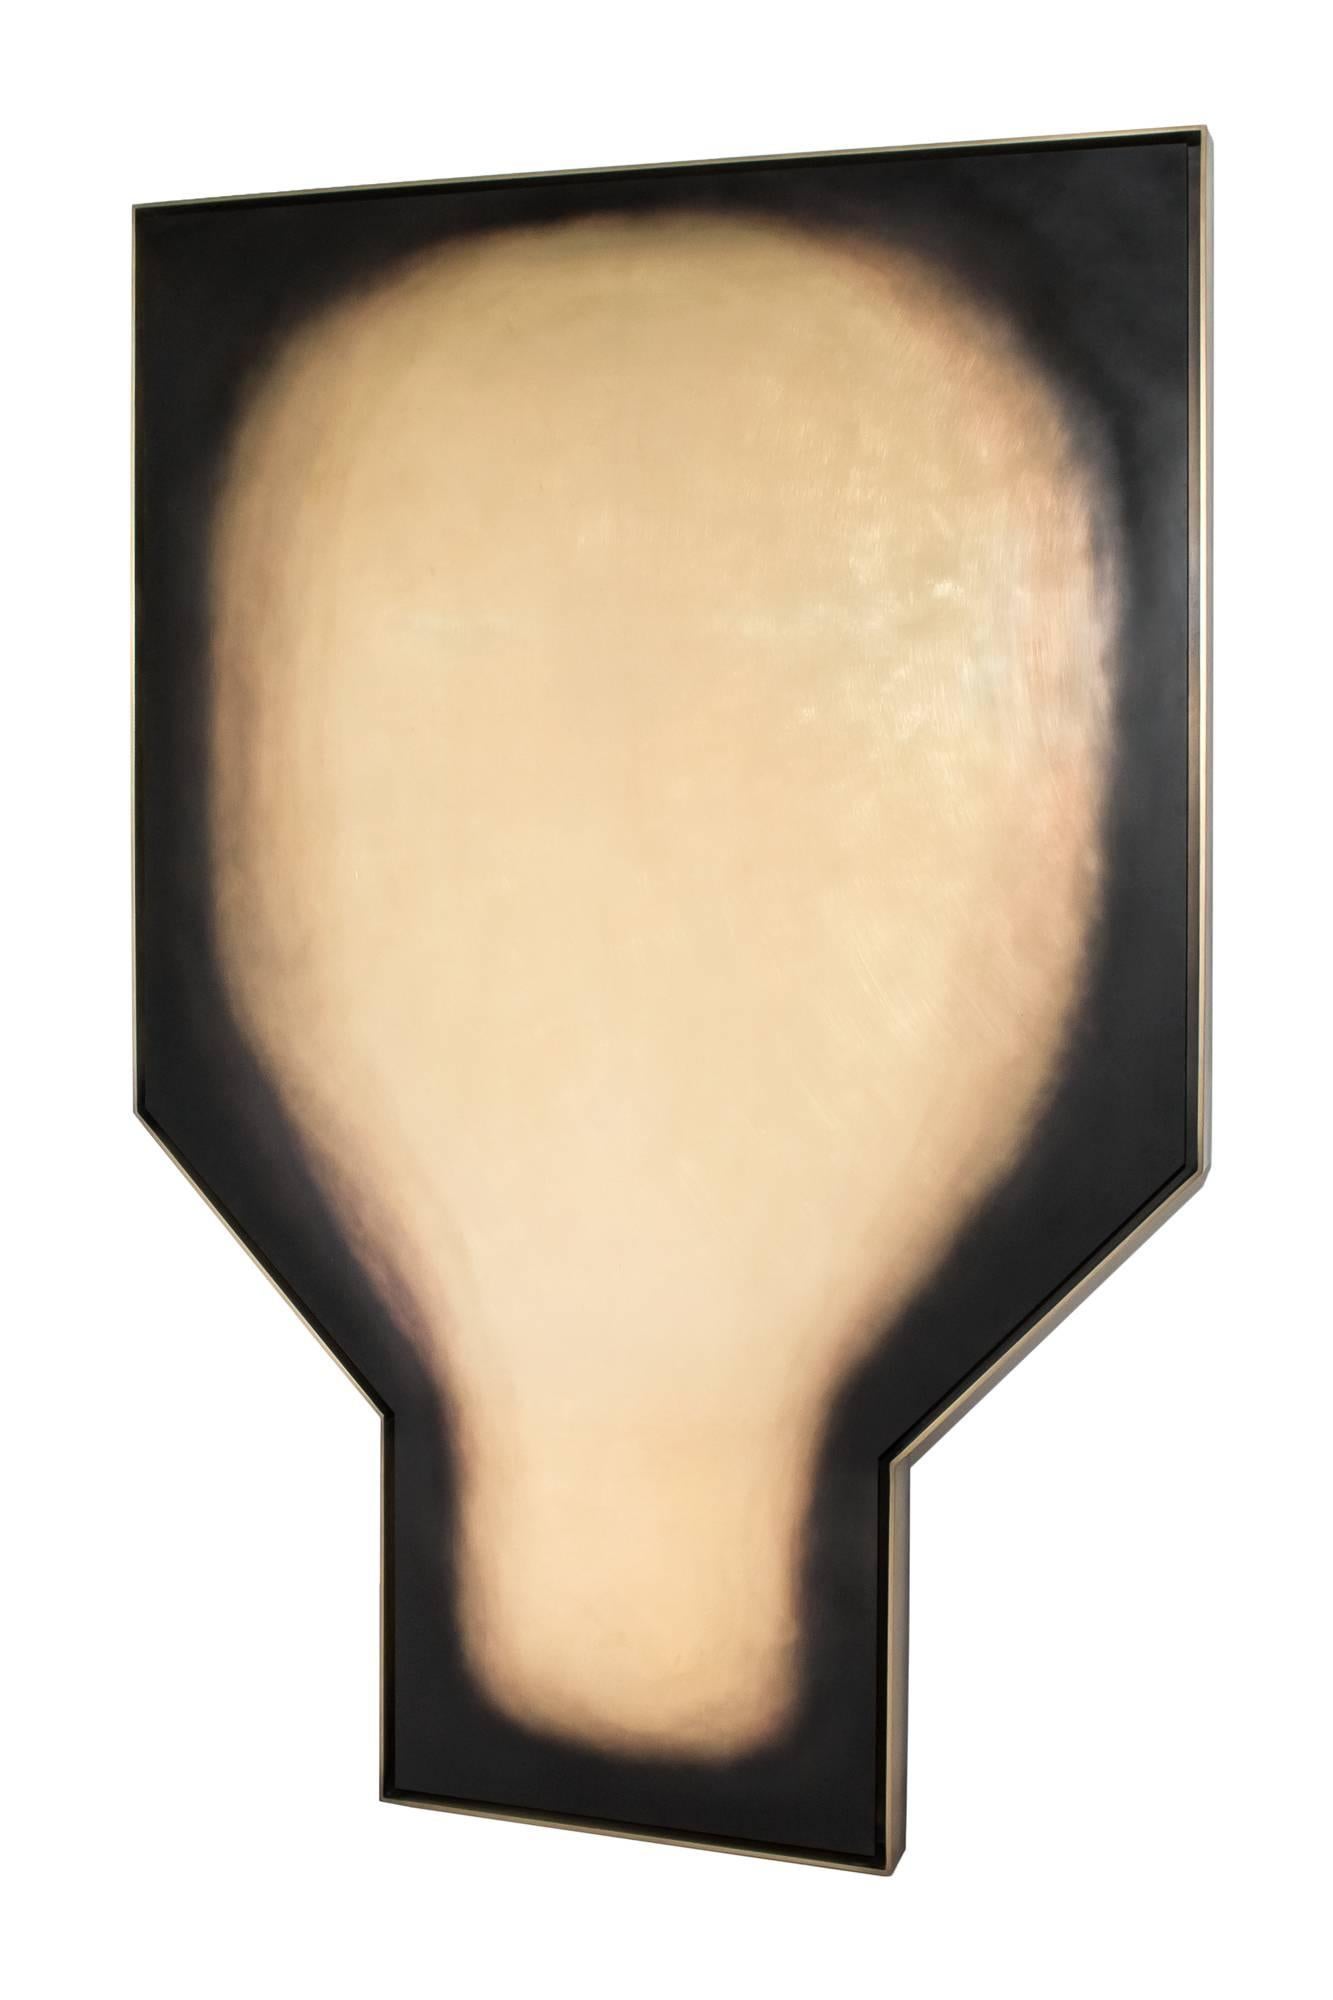 Nero Mirror by Lukas Machnik available from LMD/studio. 

LMD/studio founder Lukas Machnik was inspired by the mirrors of the ancient world, which were usually made from polished brass, in designing the Nero Mirror. 

The mirror features a